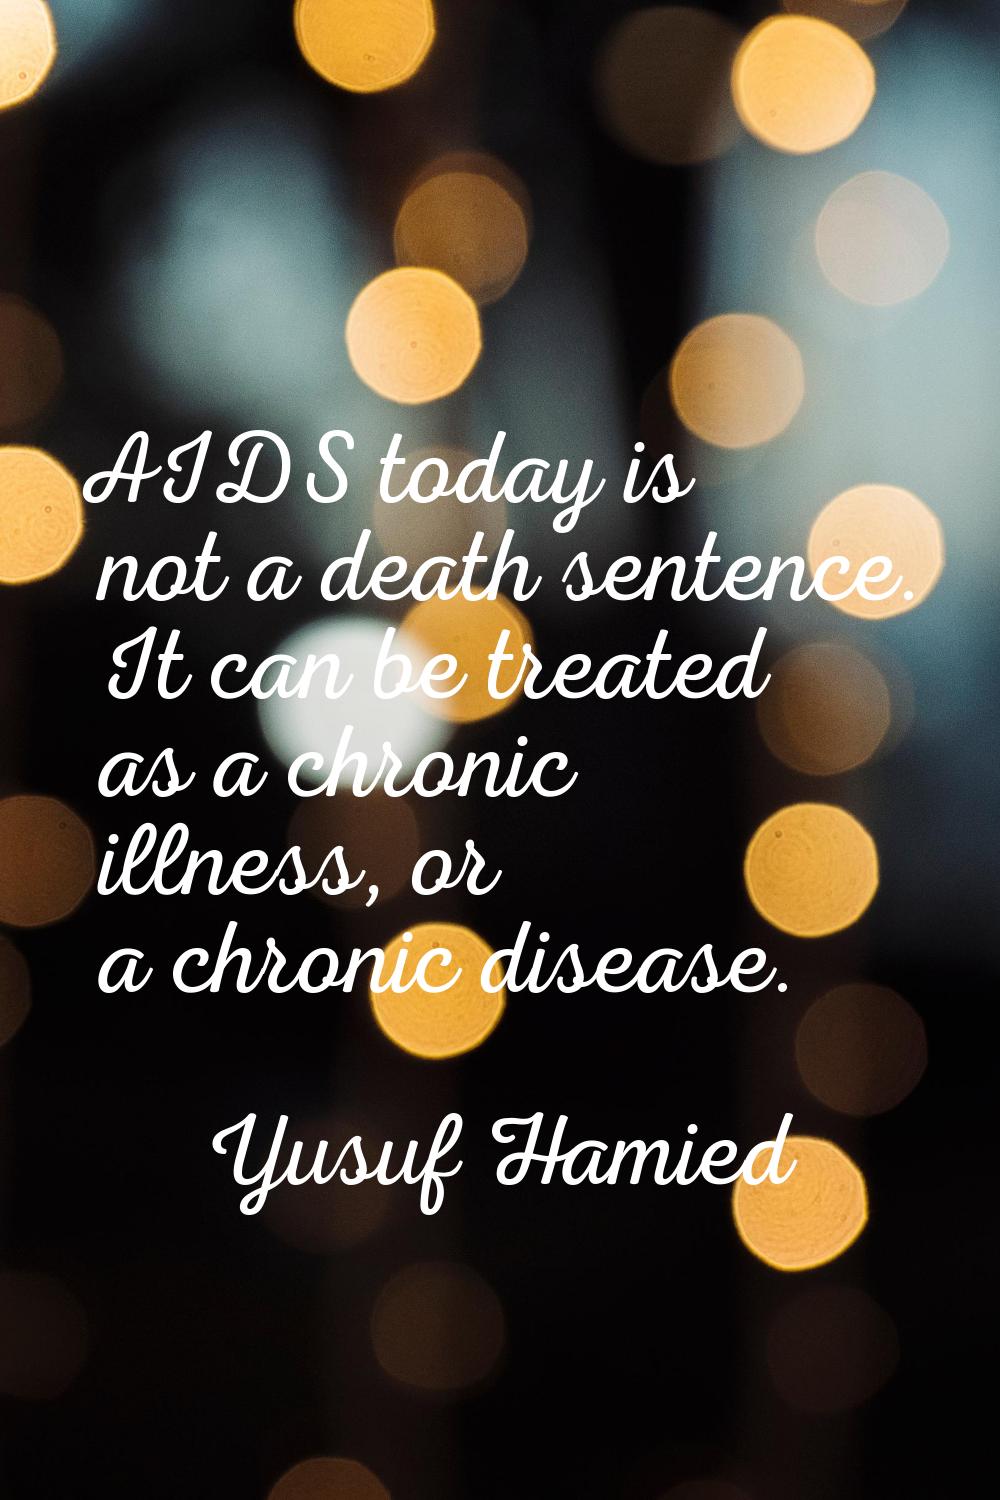 AIDS today is not a death sentence. It can be treated as a chronic illness, or a chronic disease.